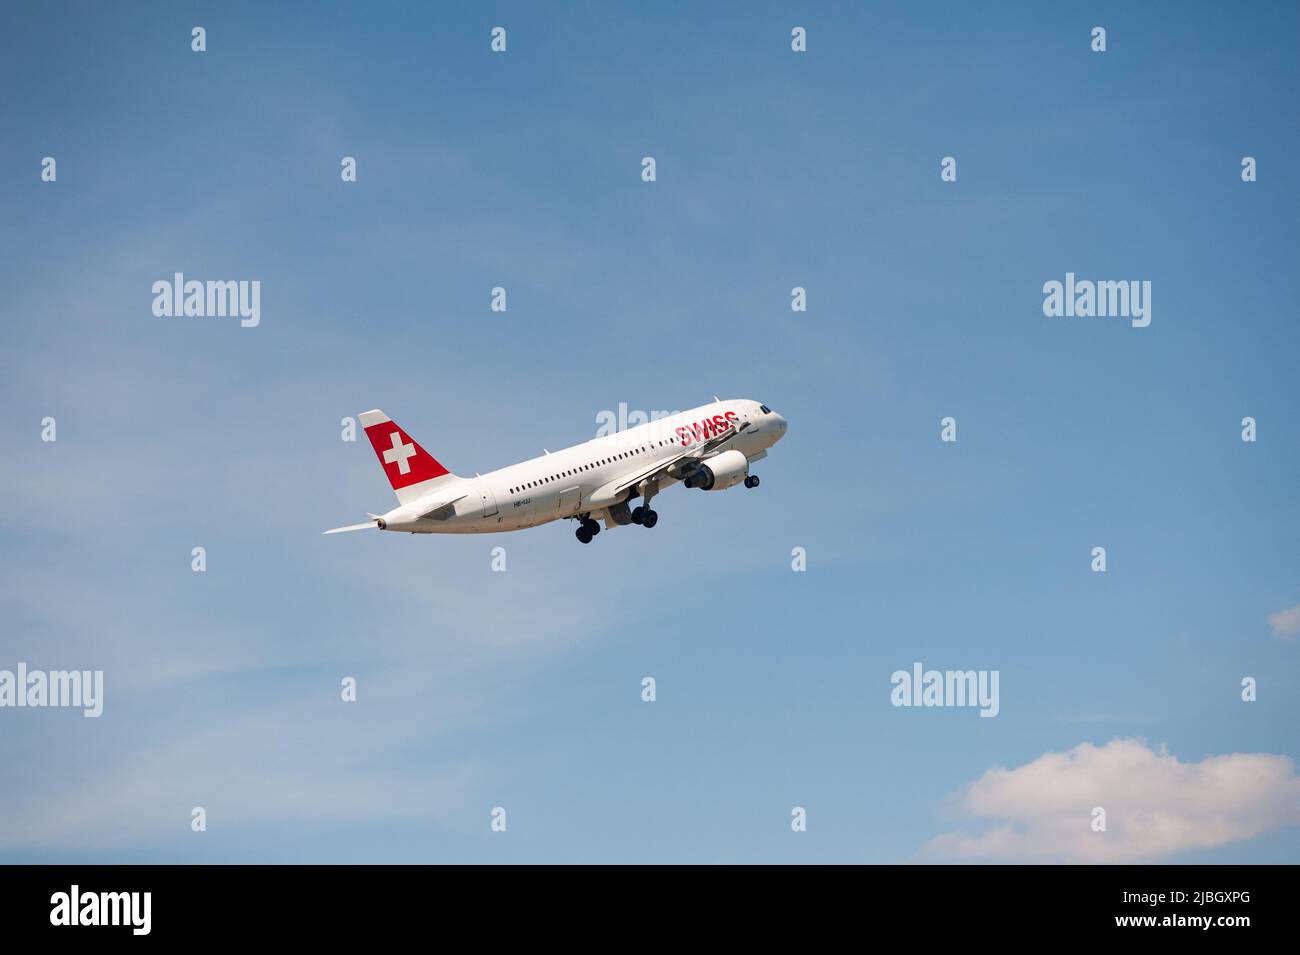 03.06.2022, Berlin, Germany, Europe - A Swiss Airlines Airbus A320 passenger aircraft takes off from Berlin Brandenburg Airport BER. Stock Photo